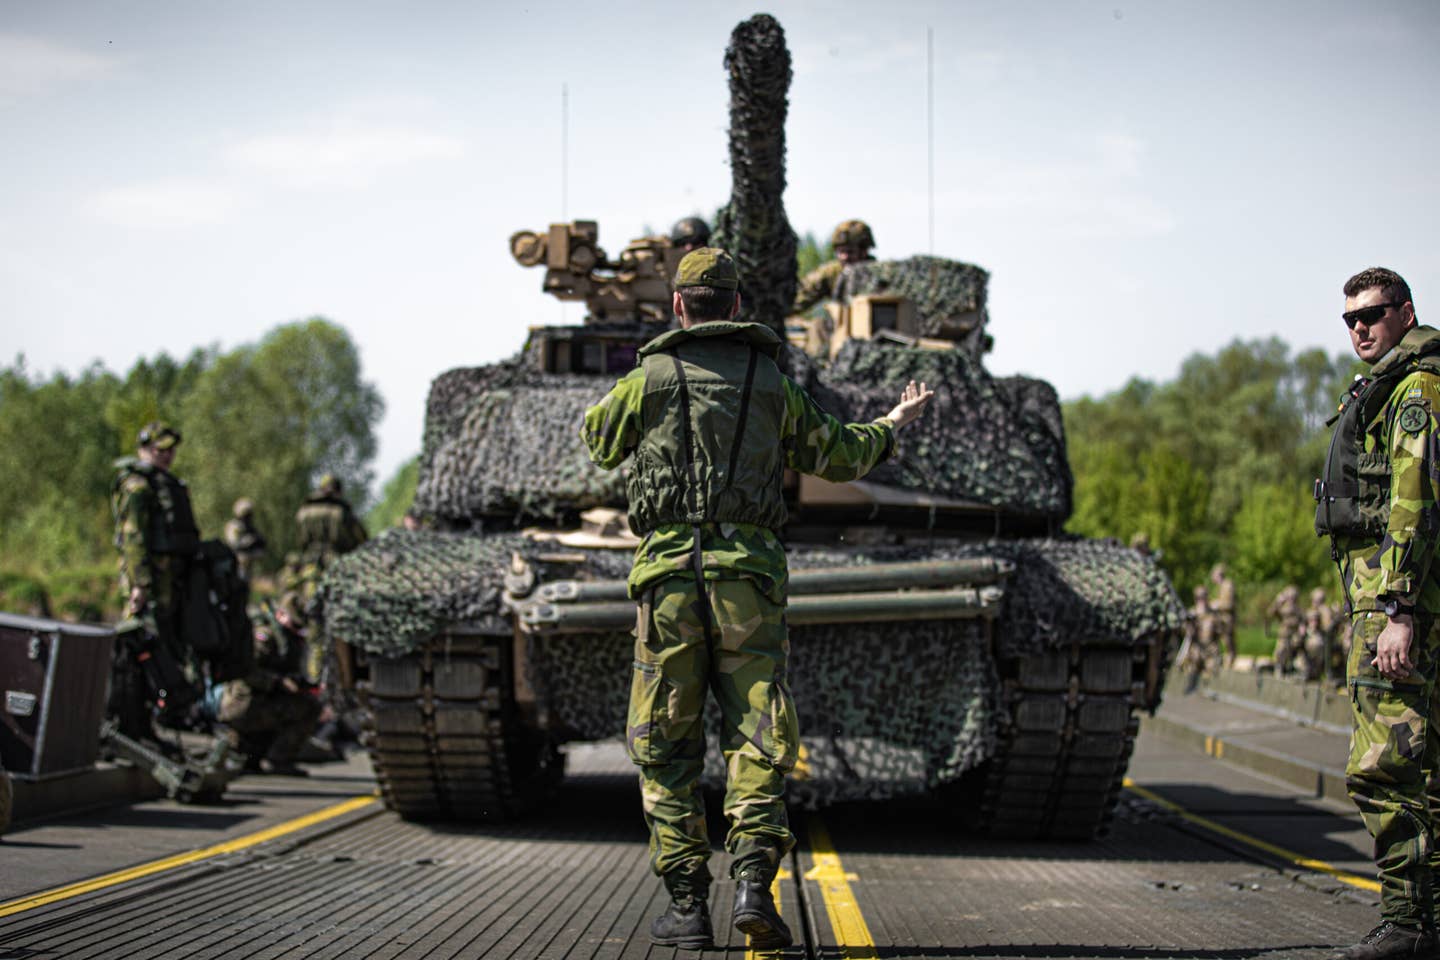 A Swedish soldier guides a U.S. Army M1A2 Abrams tank during a wet-gap crossing at Dęblin, Poland, in May 2022. U.S. Army National Guard photo by Sgt. Agustín Montañez